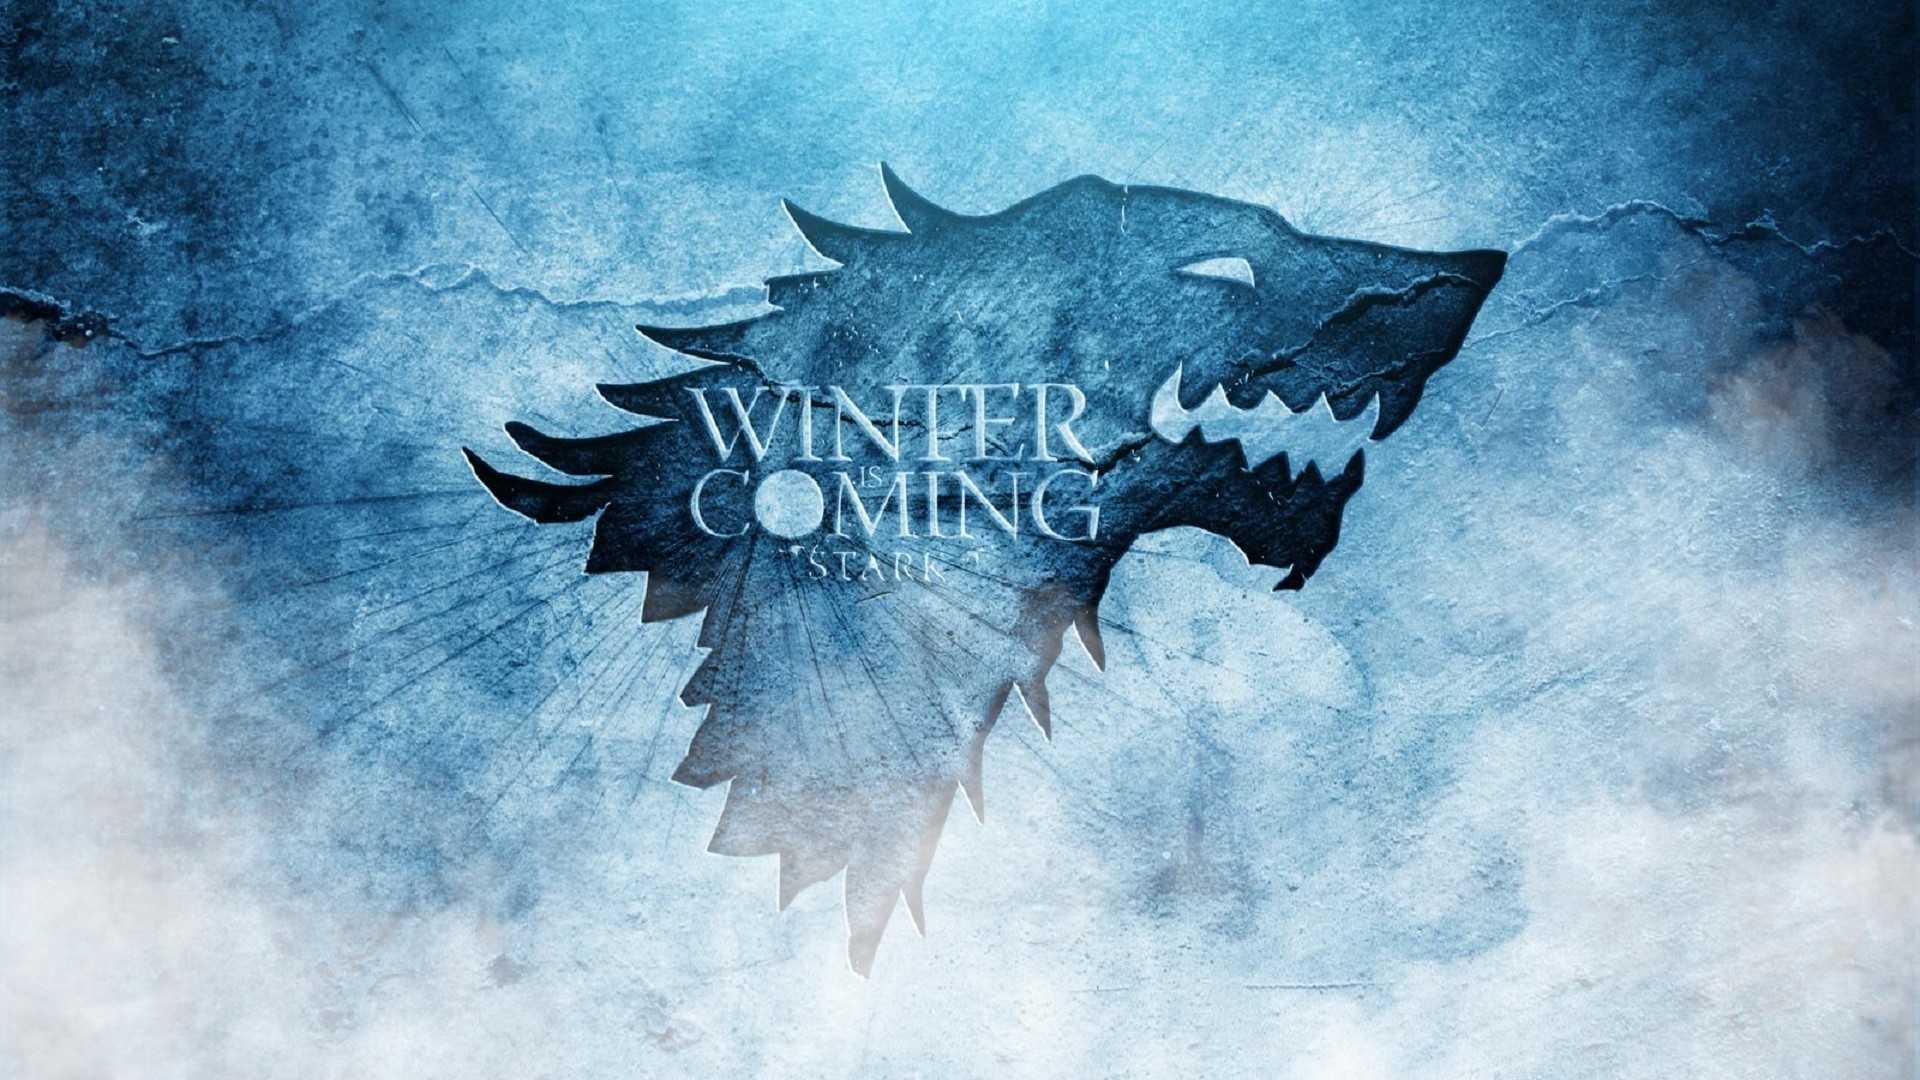 Game of Thrones the Song of Ice and Fire for 1920 x 1080 HDTV 1080p resolution